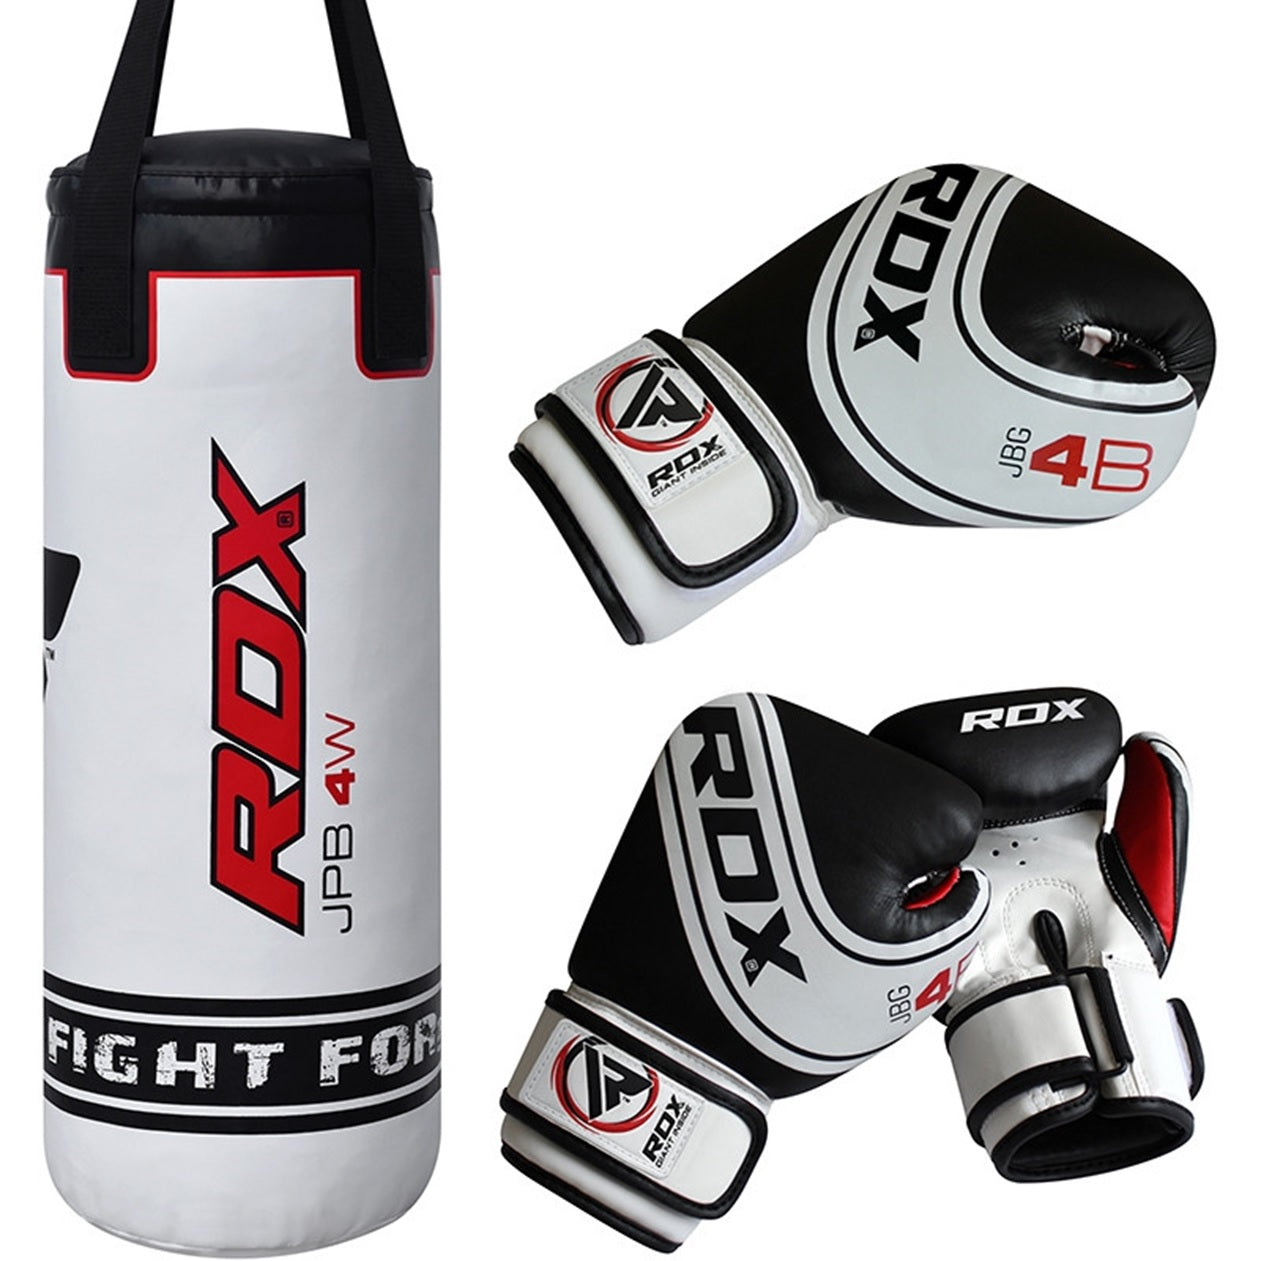 Robo Punch Bag for children from RDX unfilled with boxing gloves